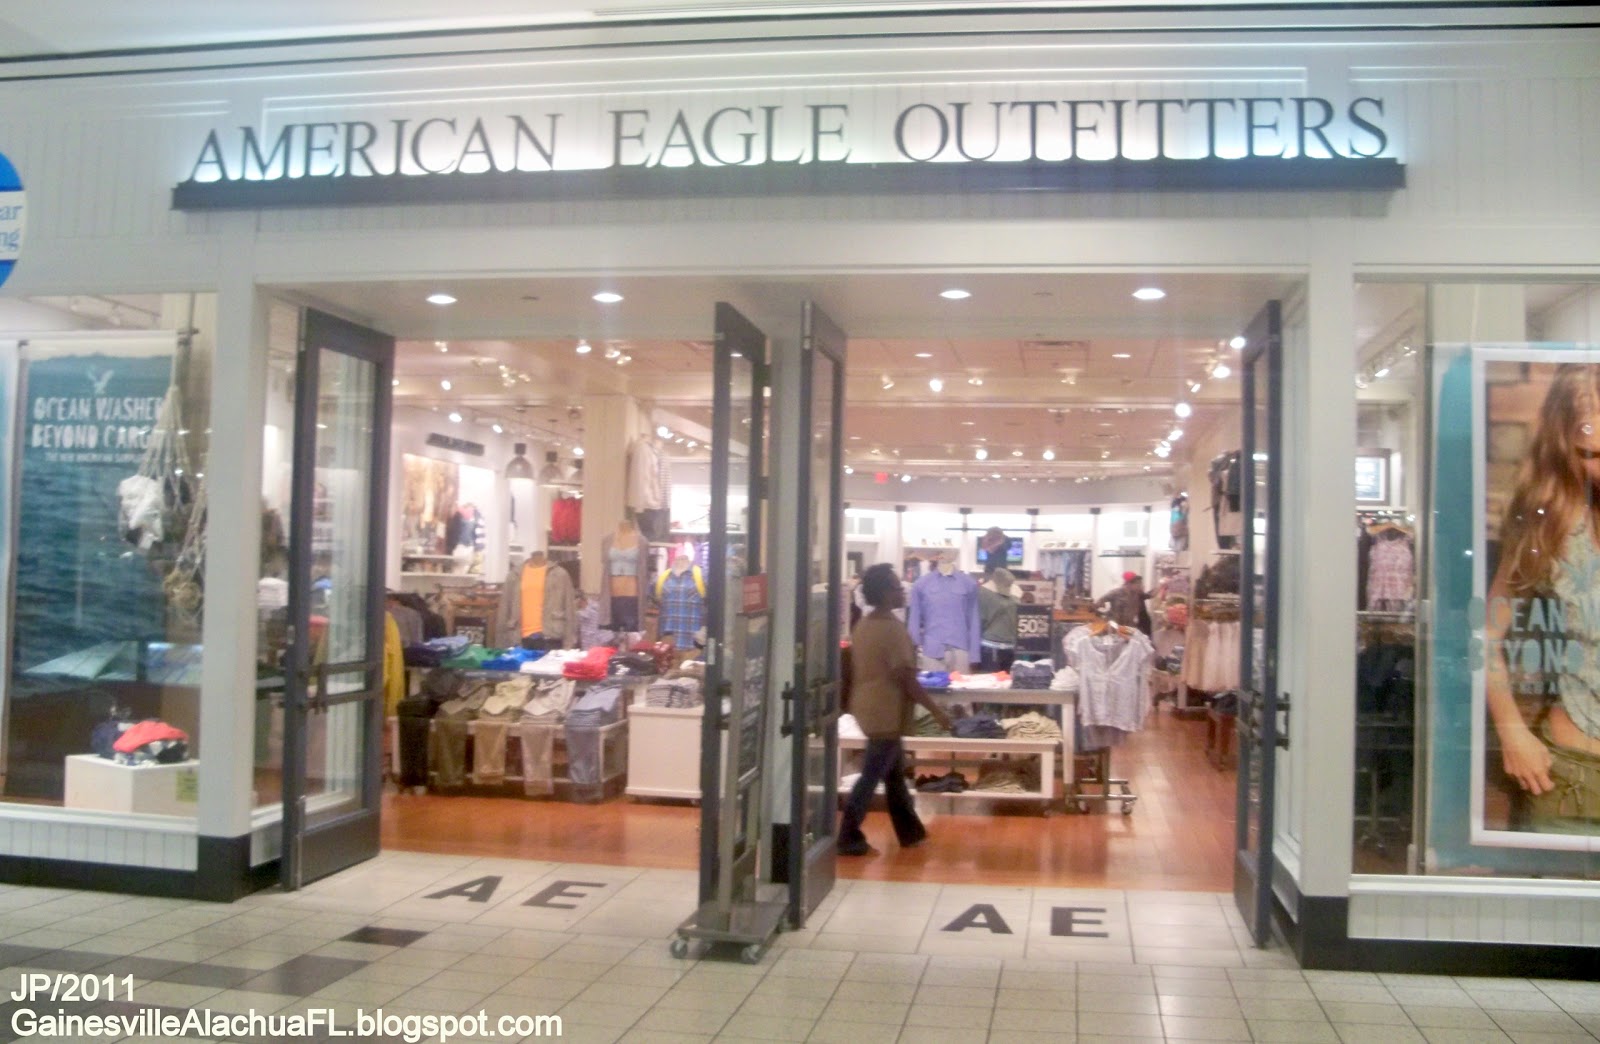 EAGLE OUTFITTERS GAINESVILLE FLORIDA American Eagle Outfitters Store ...